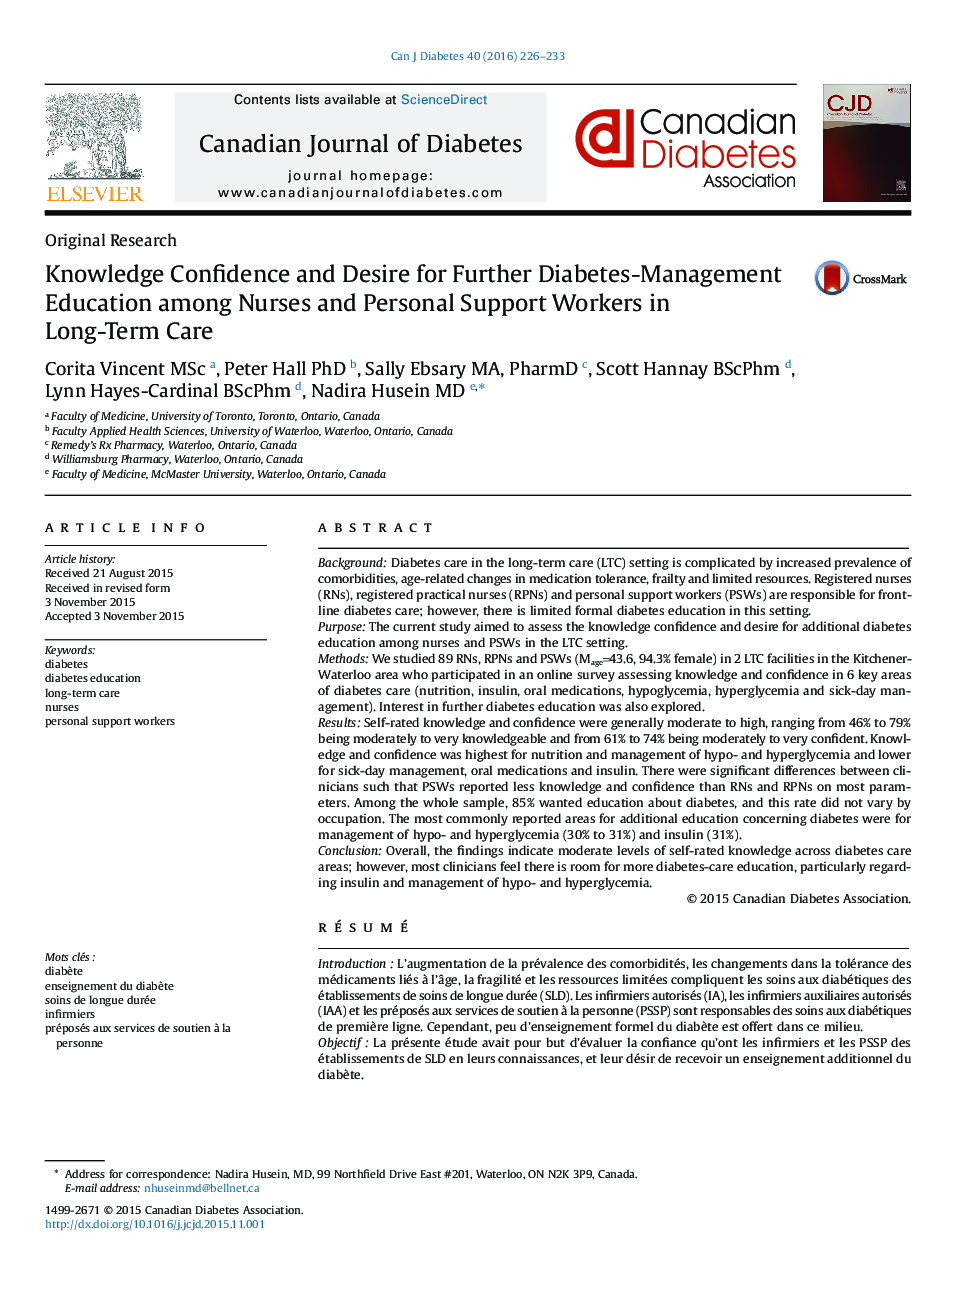 Original ResearchKnowledge Confidence and Desire for Further Diabetes-Management Education among Nurses and Personal Support Workers in Long-Term Care